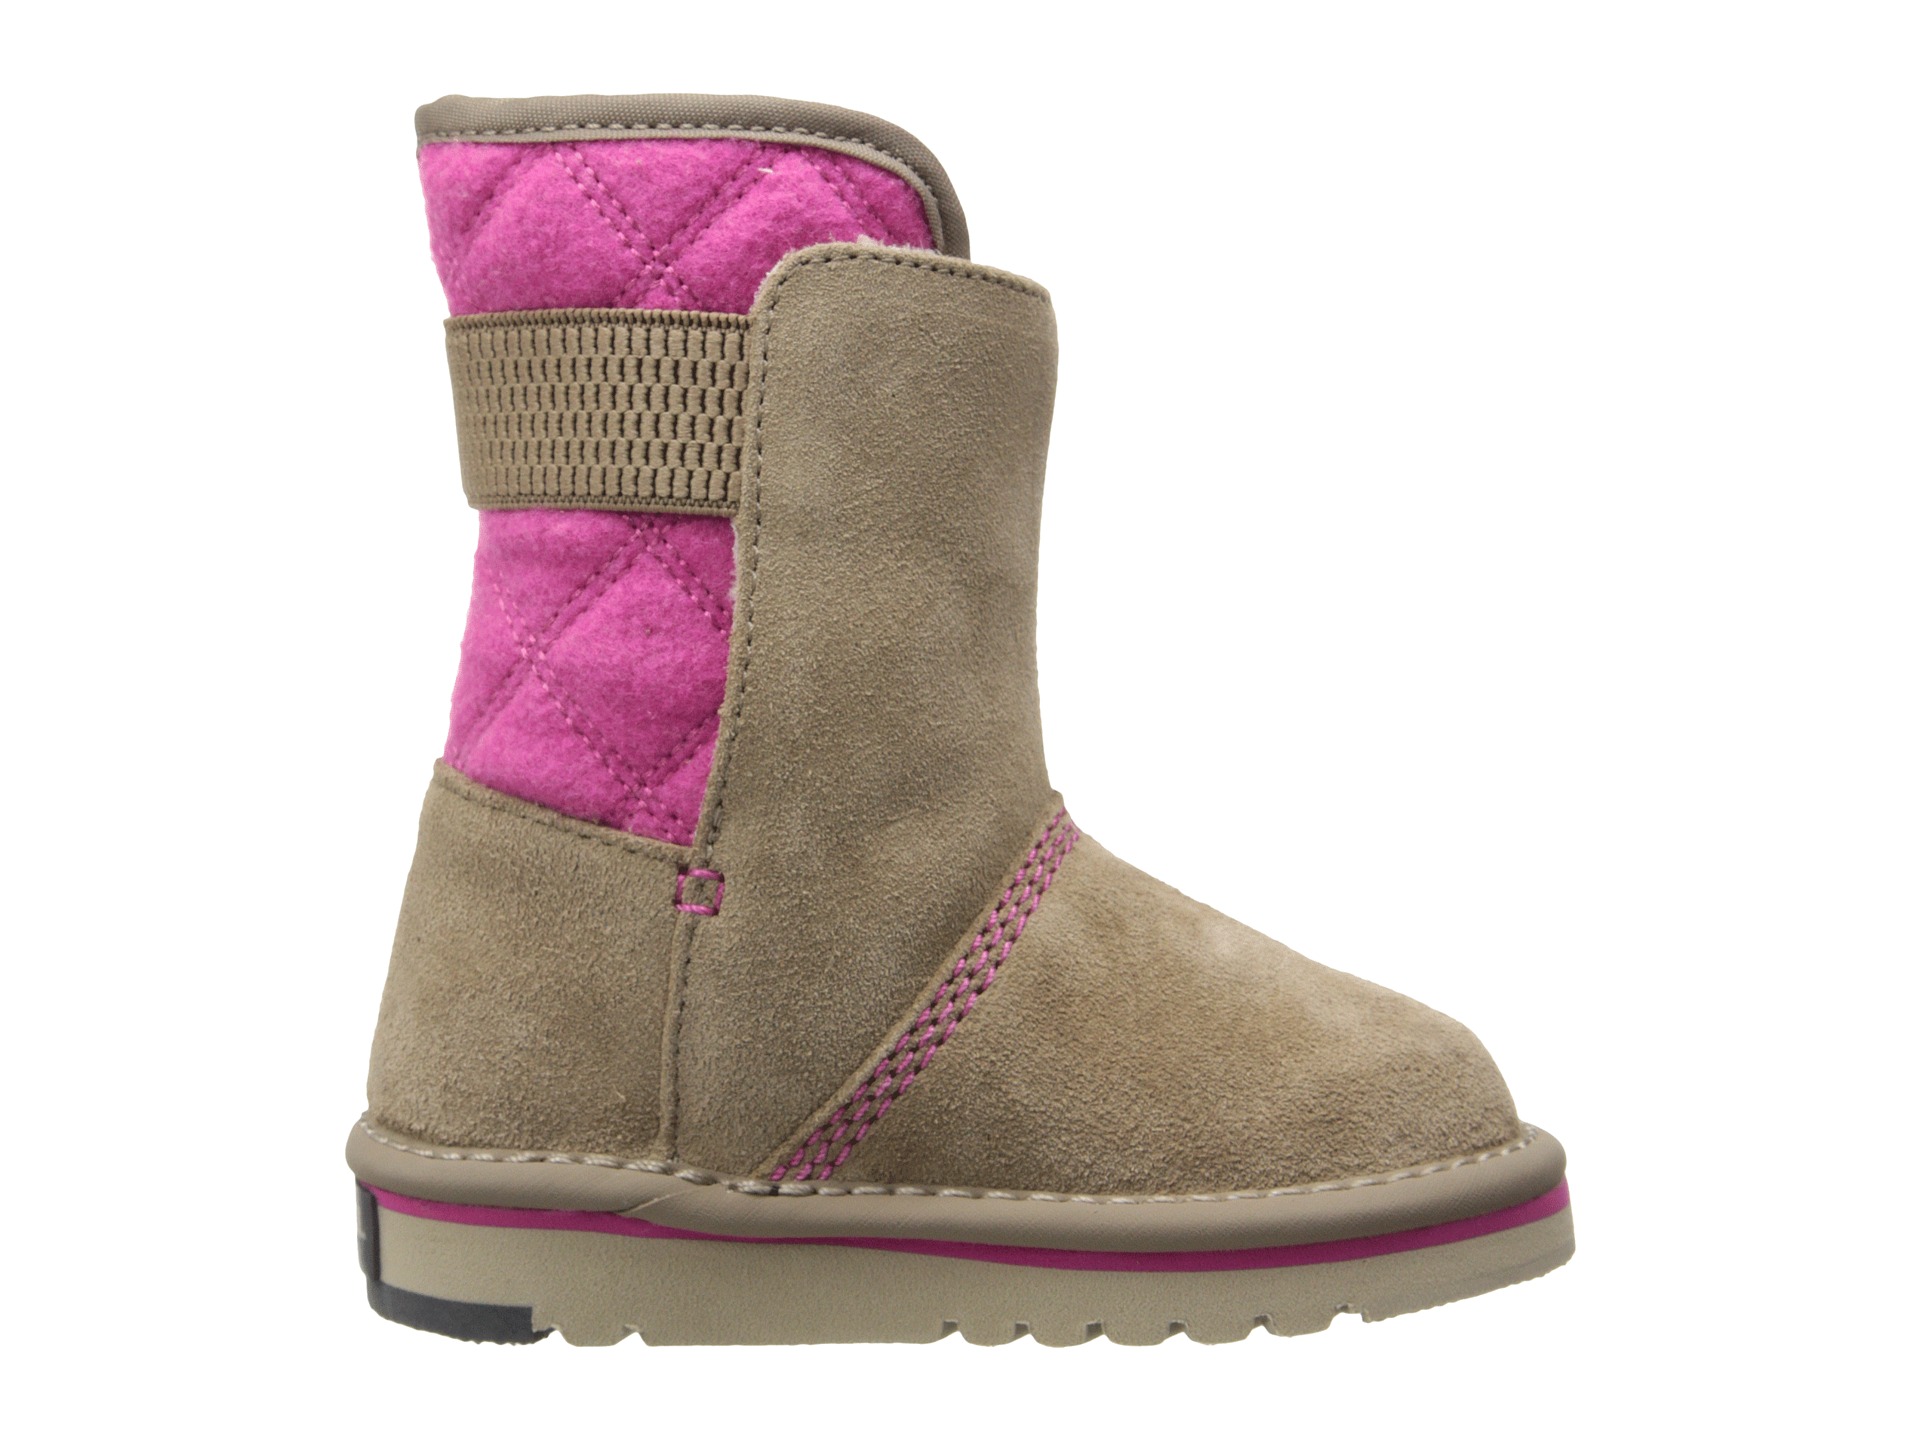 Sorel Kids The Campus Toddler Little Kid | Shipped Free at Zappos